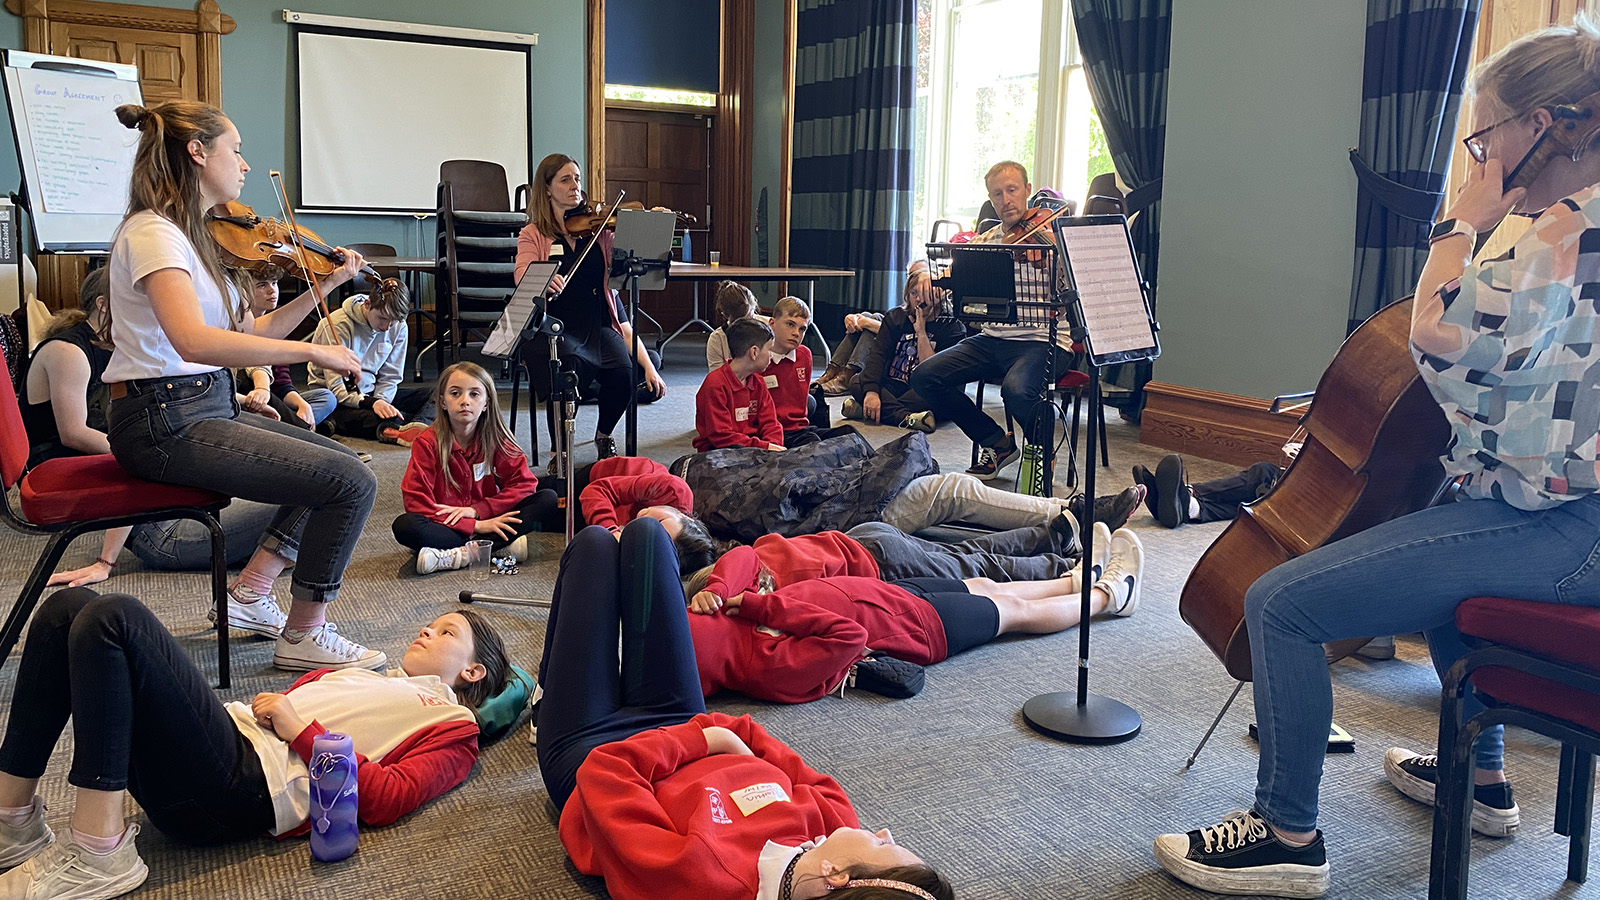 Group of children in school uniform sitting and lying on the floor while listening and watching a live performance of musicians playing violins.